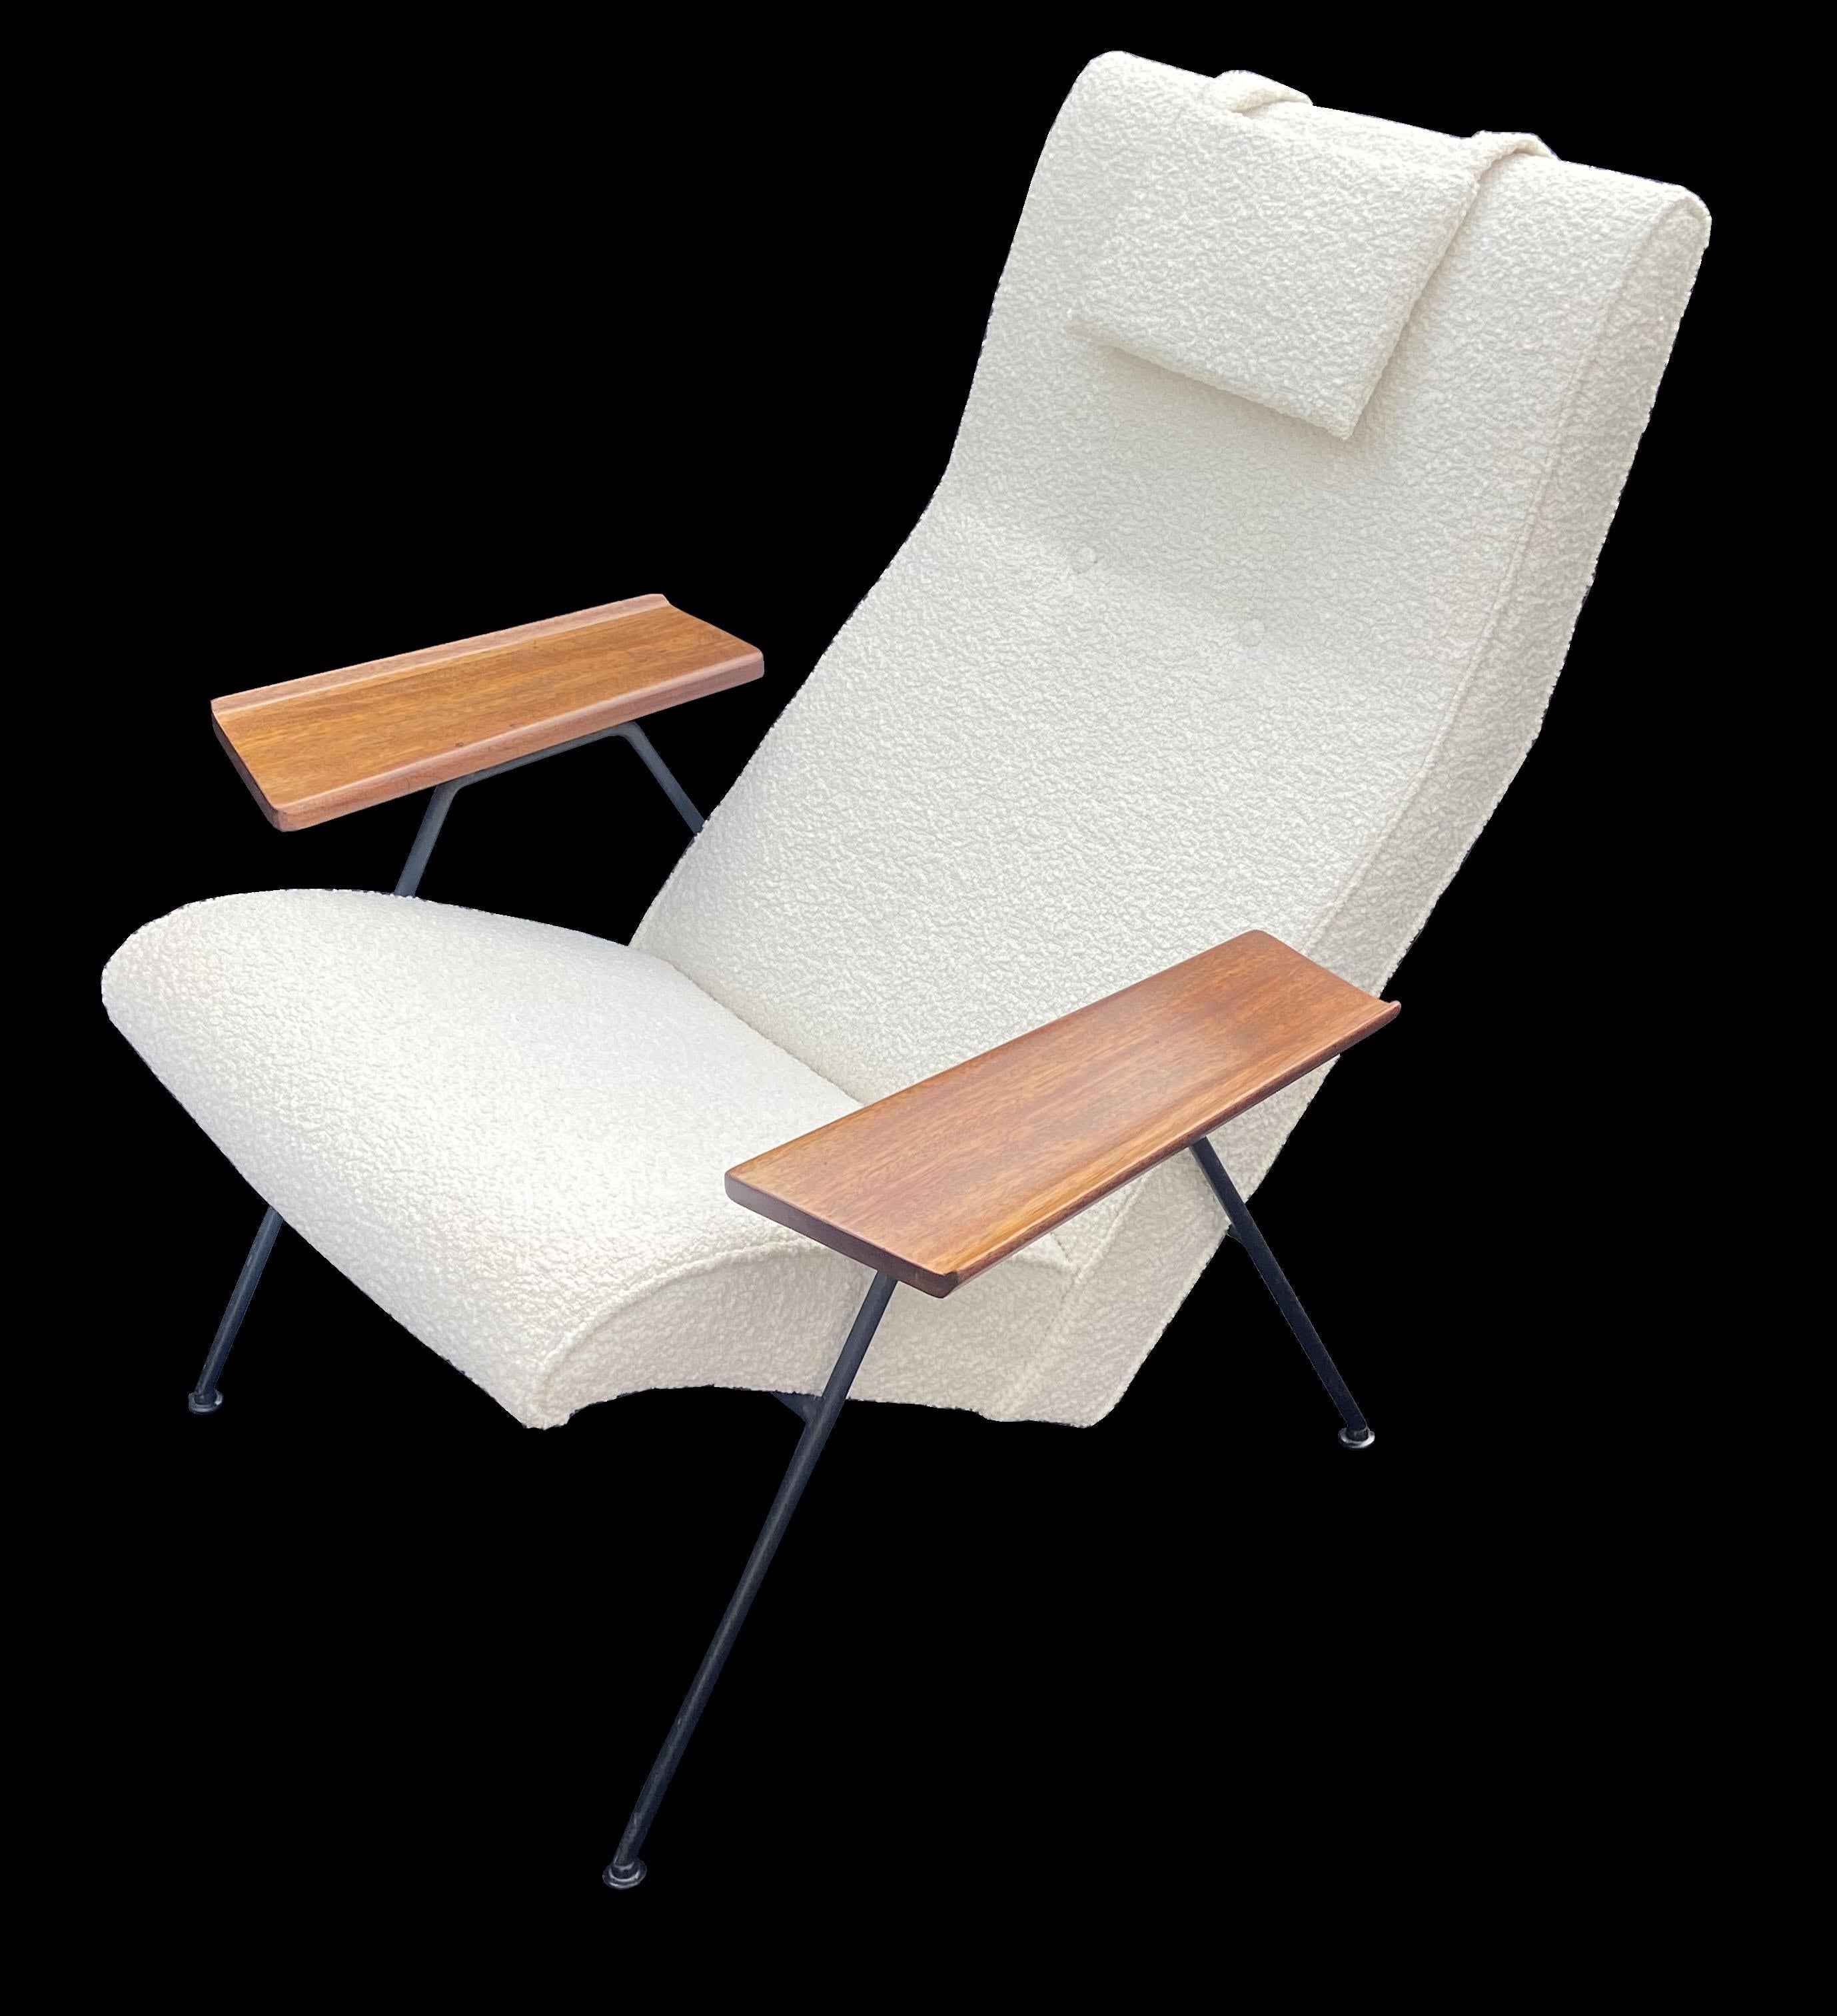 This is a stunning Original Robin Day Lounge Chair, freshly upholstered in a white boucle.
The species of Mahogany on the arms is Utile or Sipo and not on endangered species lists.